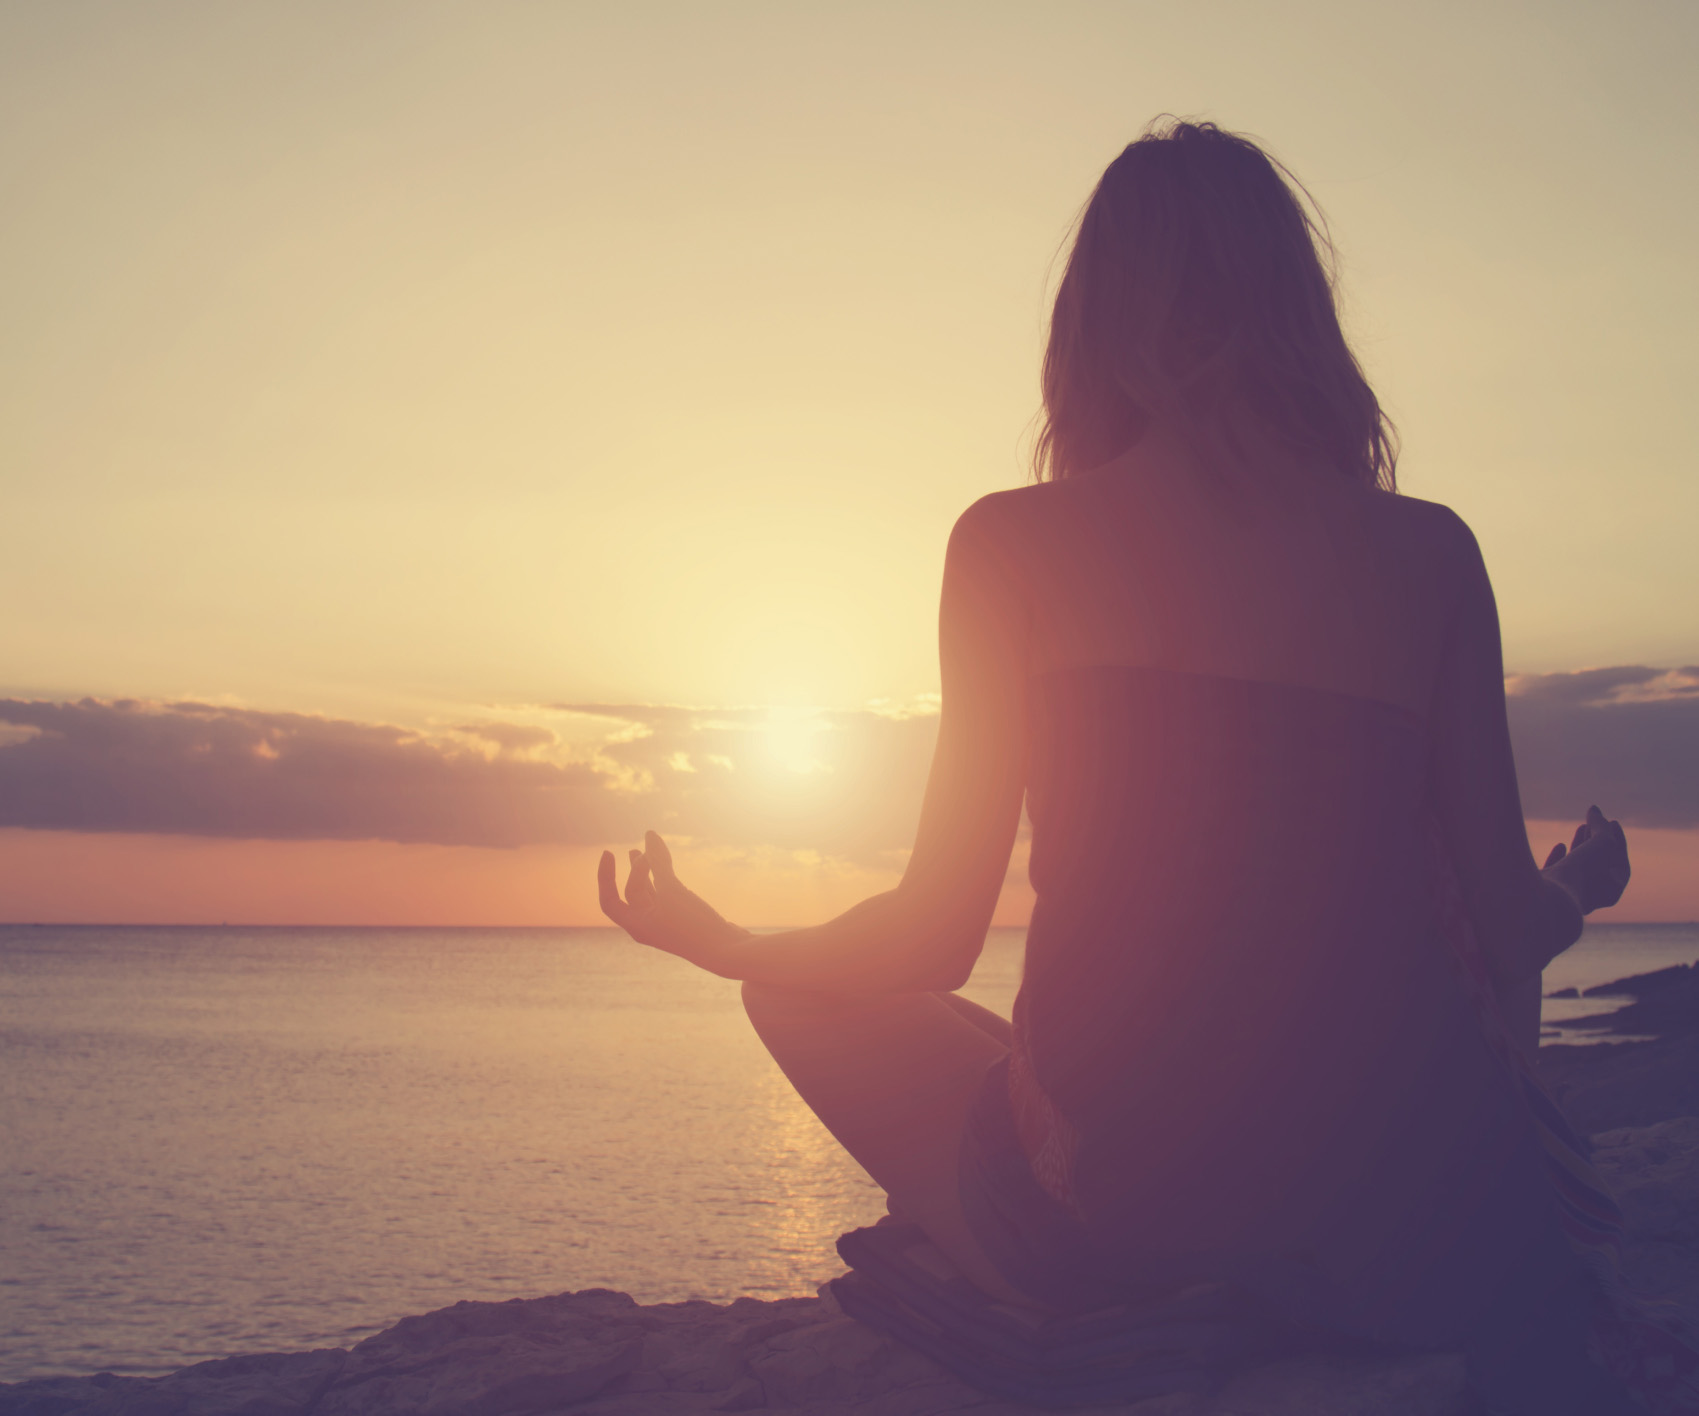 Can mindfulness increase your happiness?